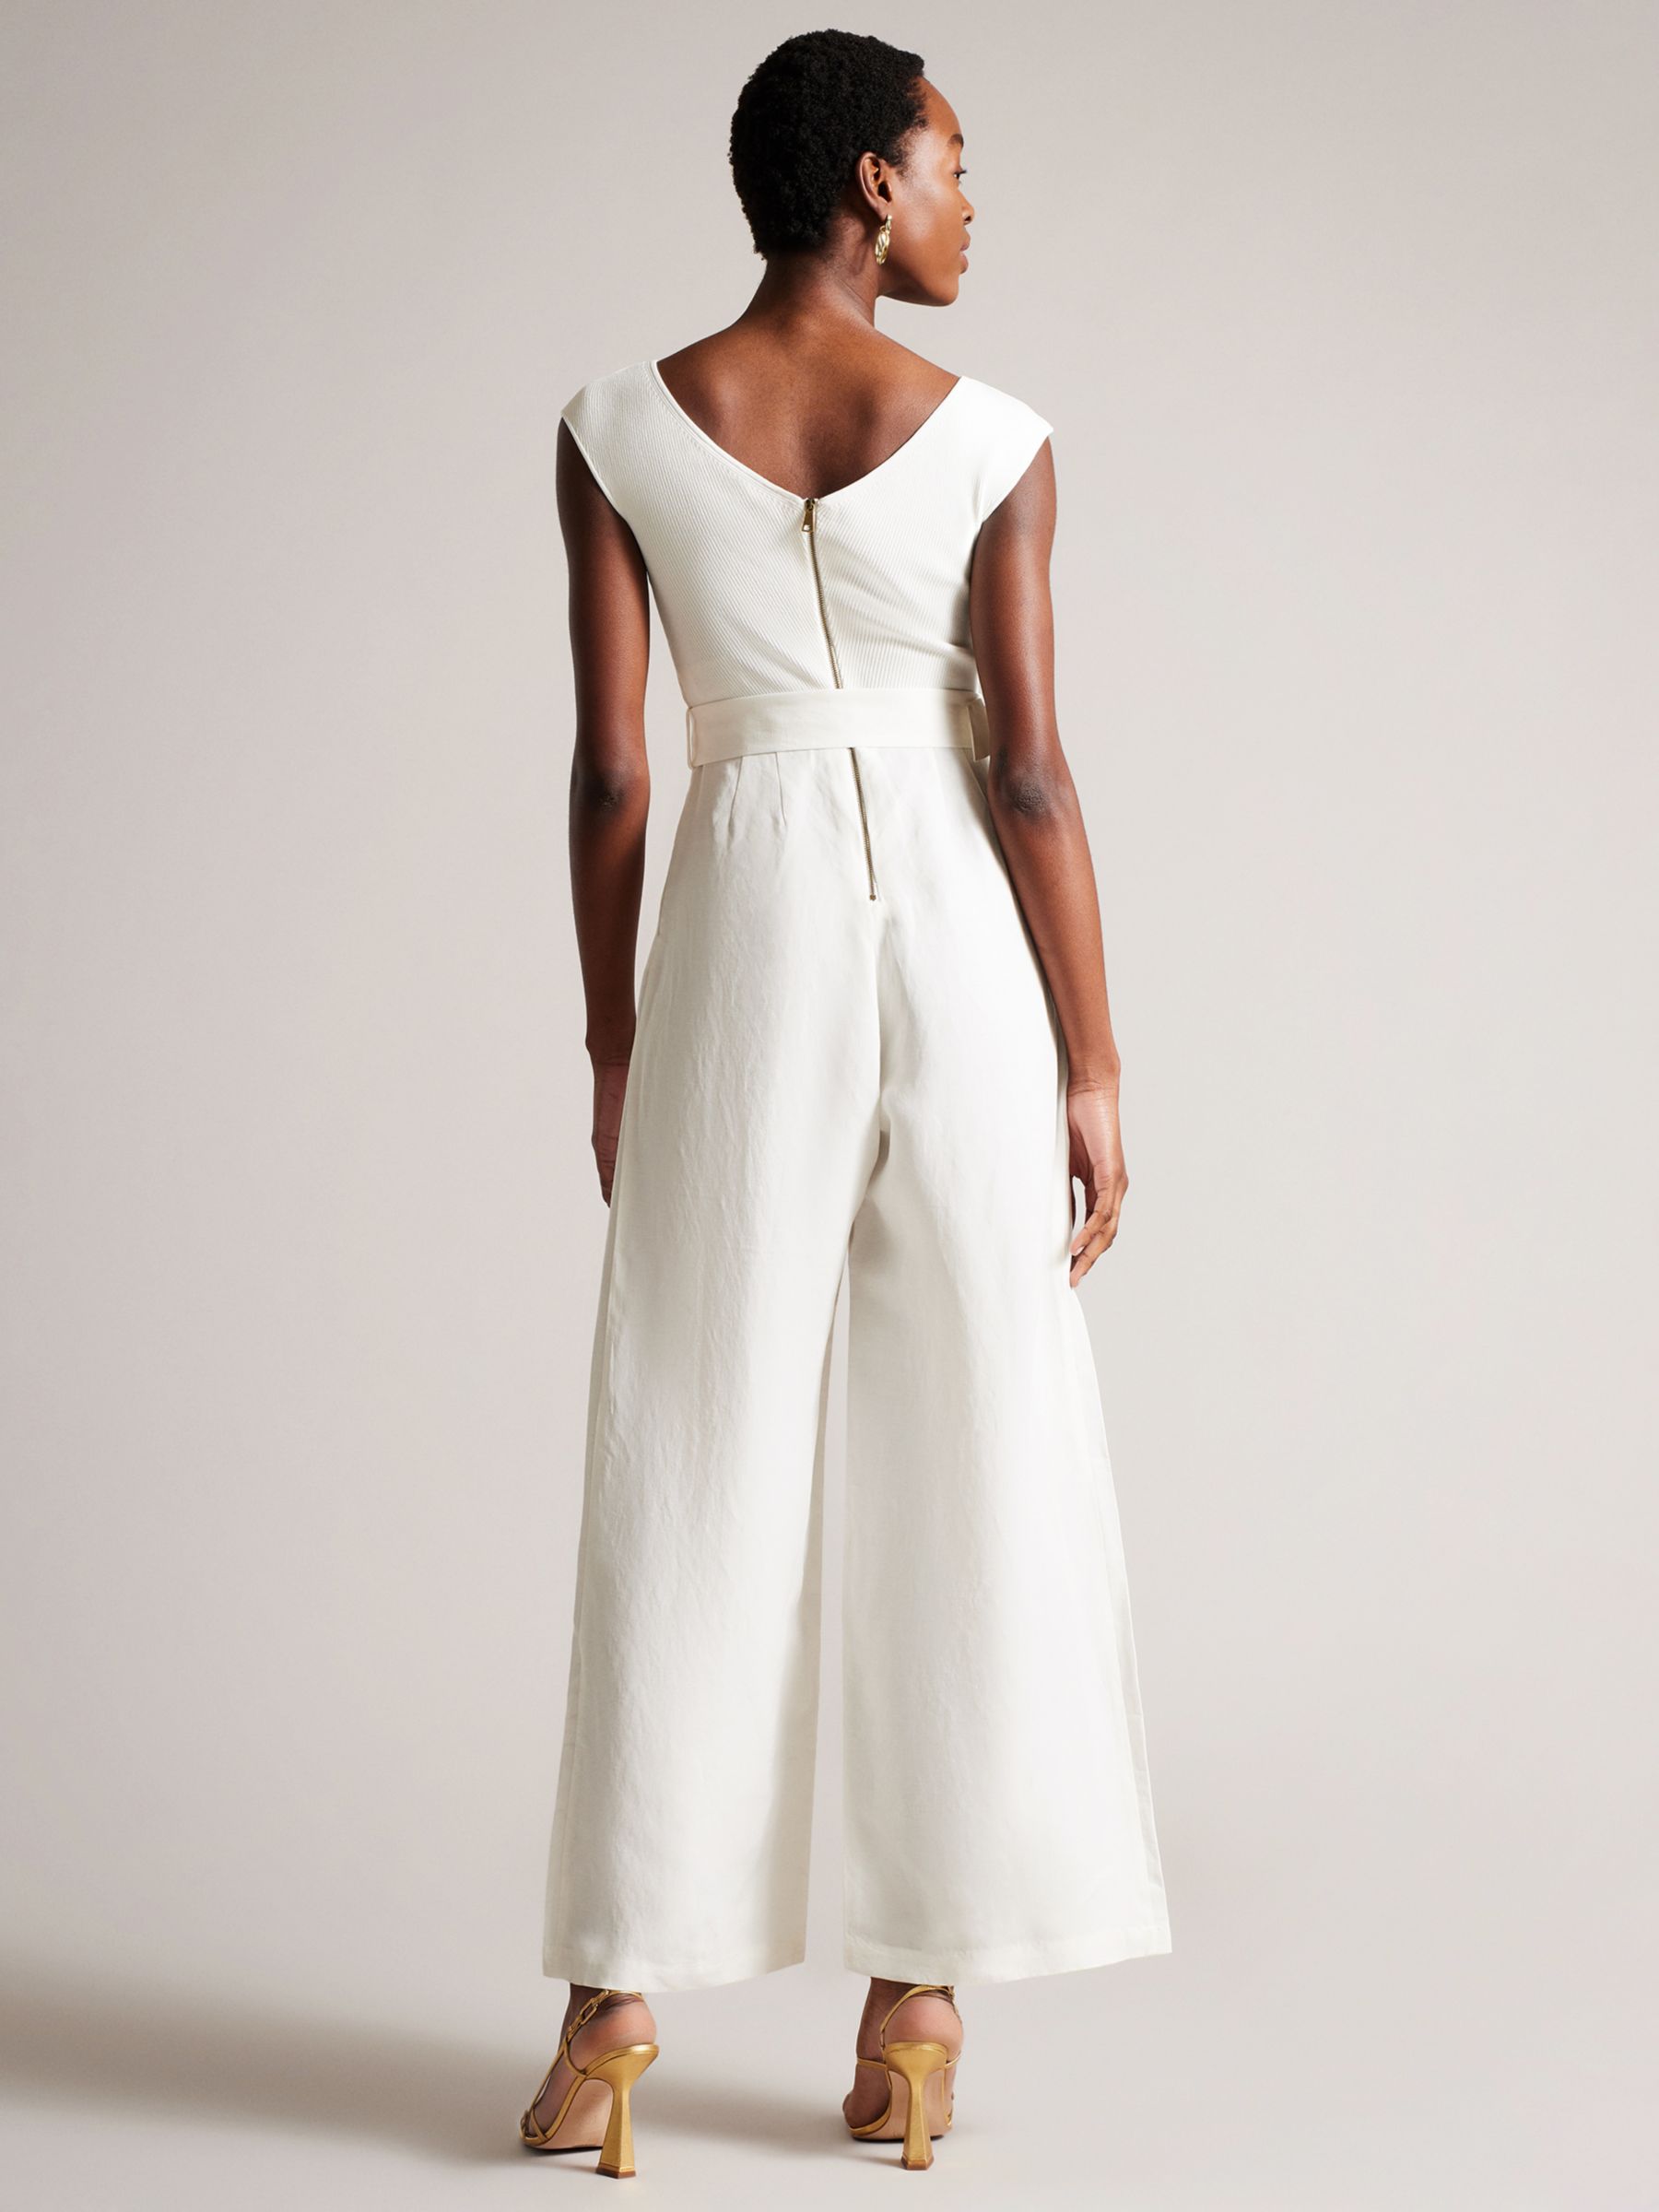 Shop White Stuff Jumpsuits for Women up to 70% Off